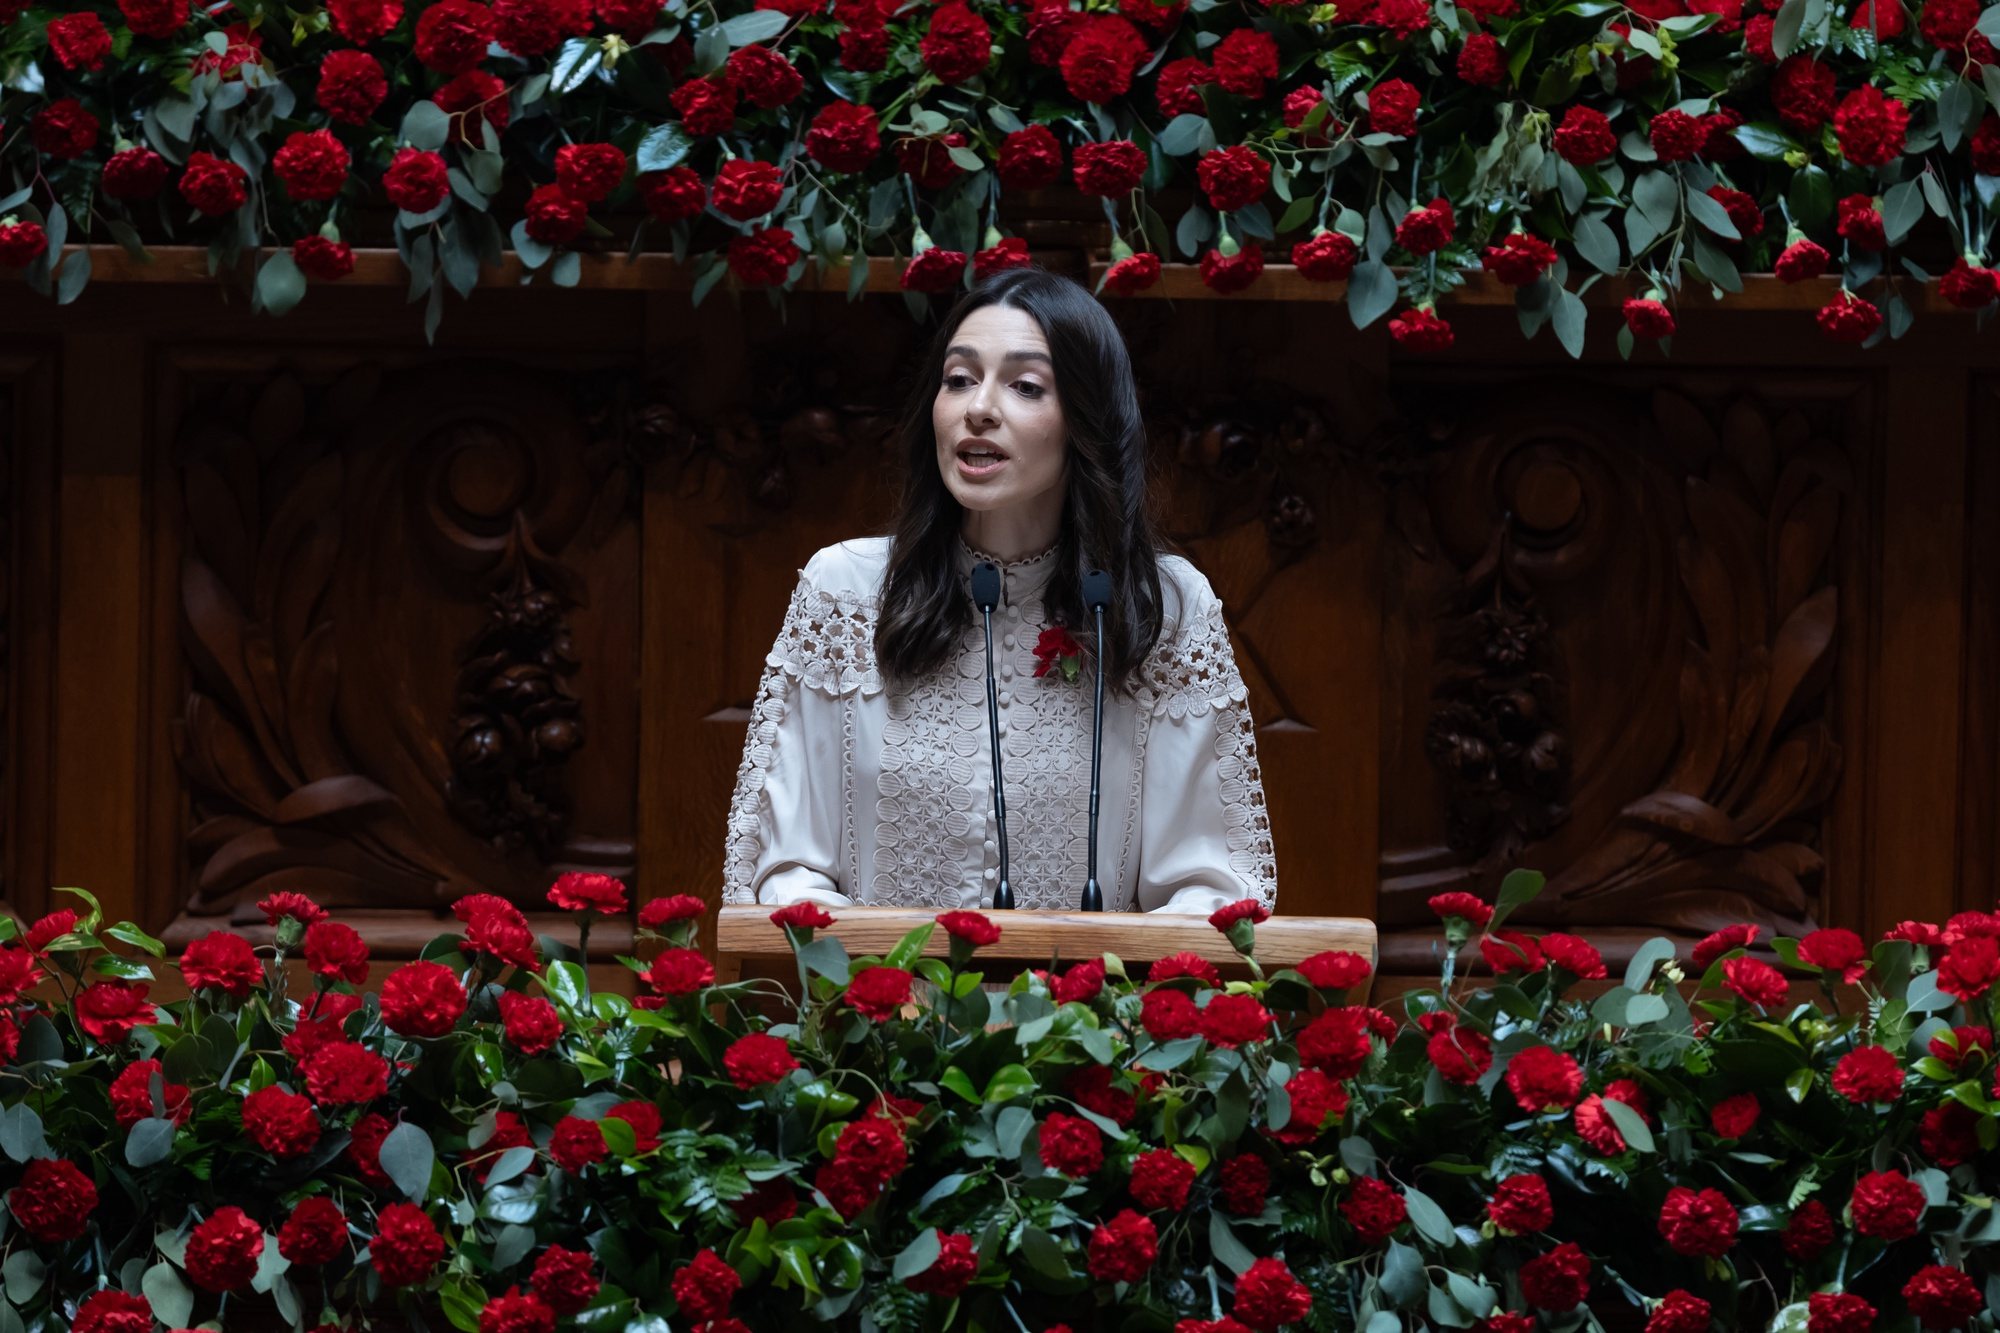 Portuguese Socialist Party (PS) deputy, Ana Gabriela Cabilhas, delivers a speech as Portuguese President, Marcelo Rebelo de Sousa (C), looks on during the solemn comemorative session at the Portuguese parliament in Lisbon, Portugal, 25 April 2024. Portugal celebrates the 50th anniversary of the Carnation Revolution that ended the authoritarian regime of Estado Novo (New State) that ruled the country between 1926 to 1974. JOSE SENA GOULAO/LUSA